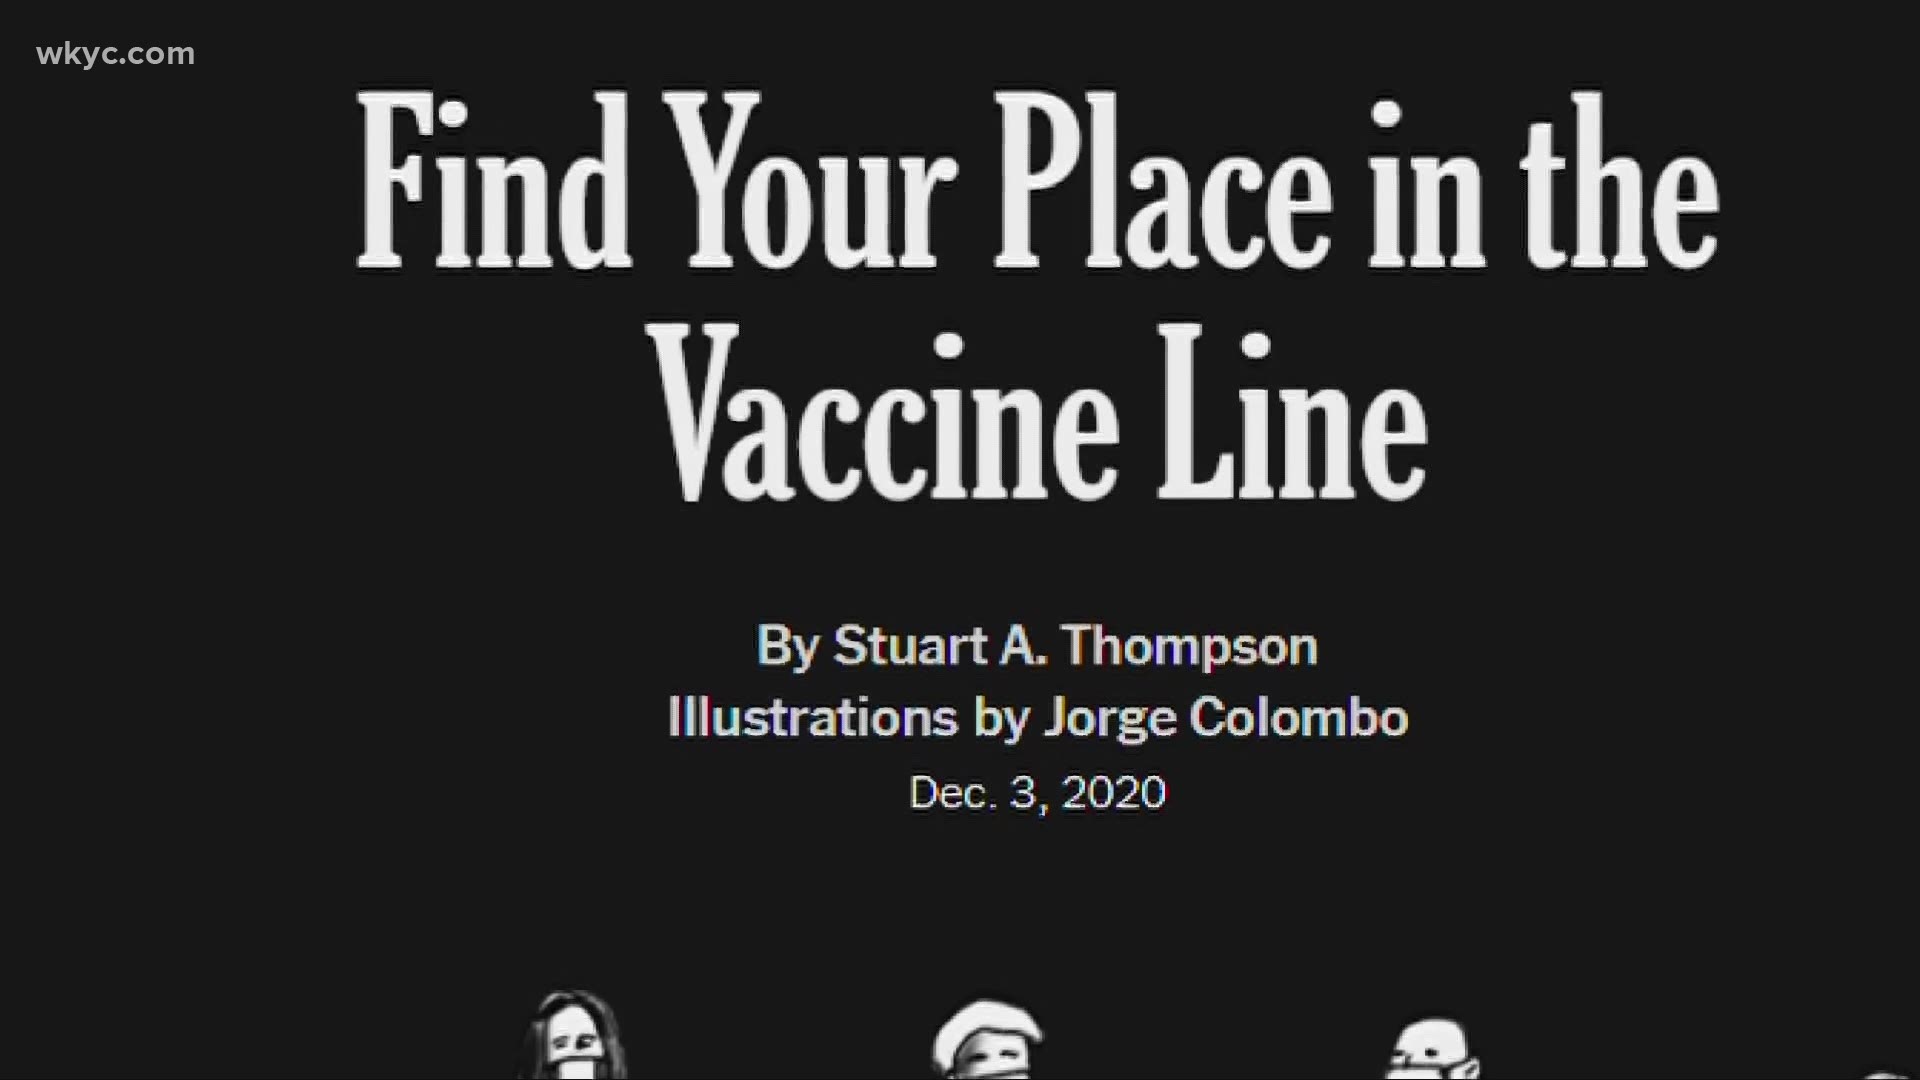 A new tool on the New York Times website sheds insight on how the vaccination process will work. Andrew Horansky has details.